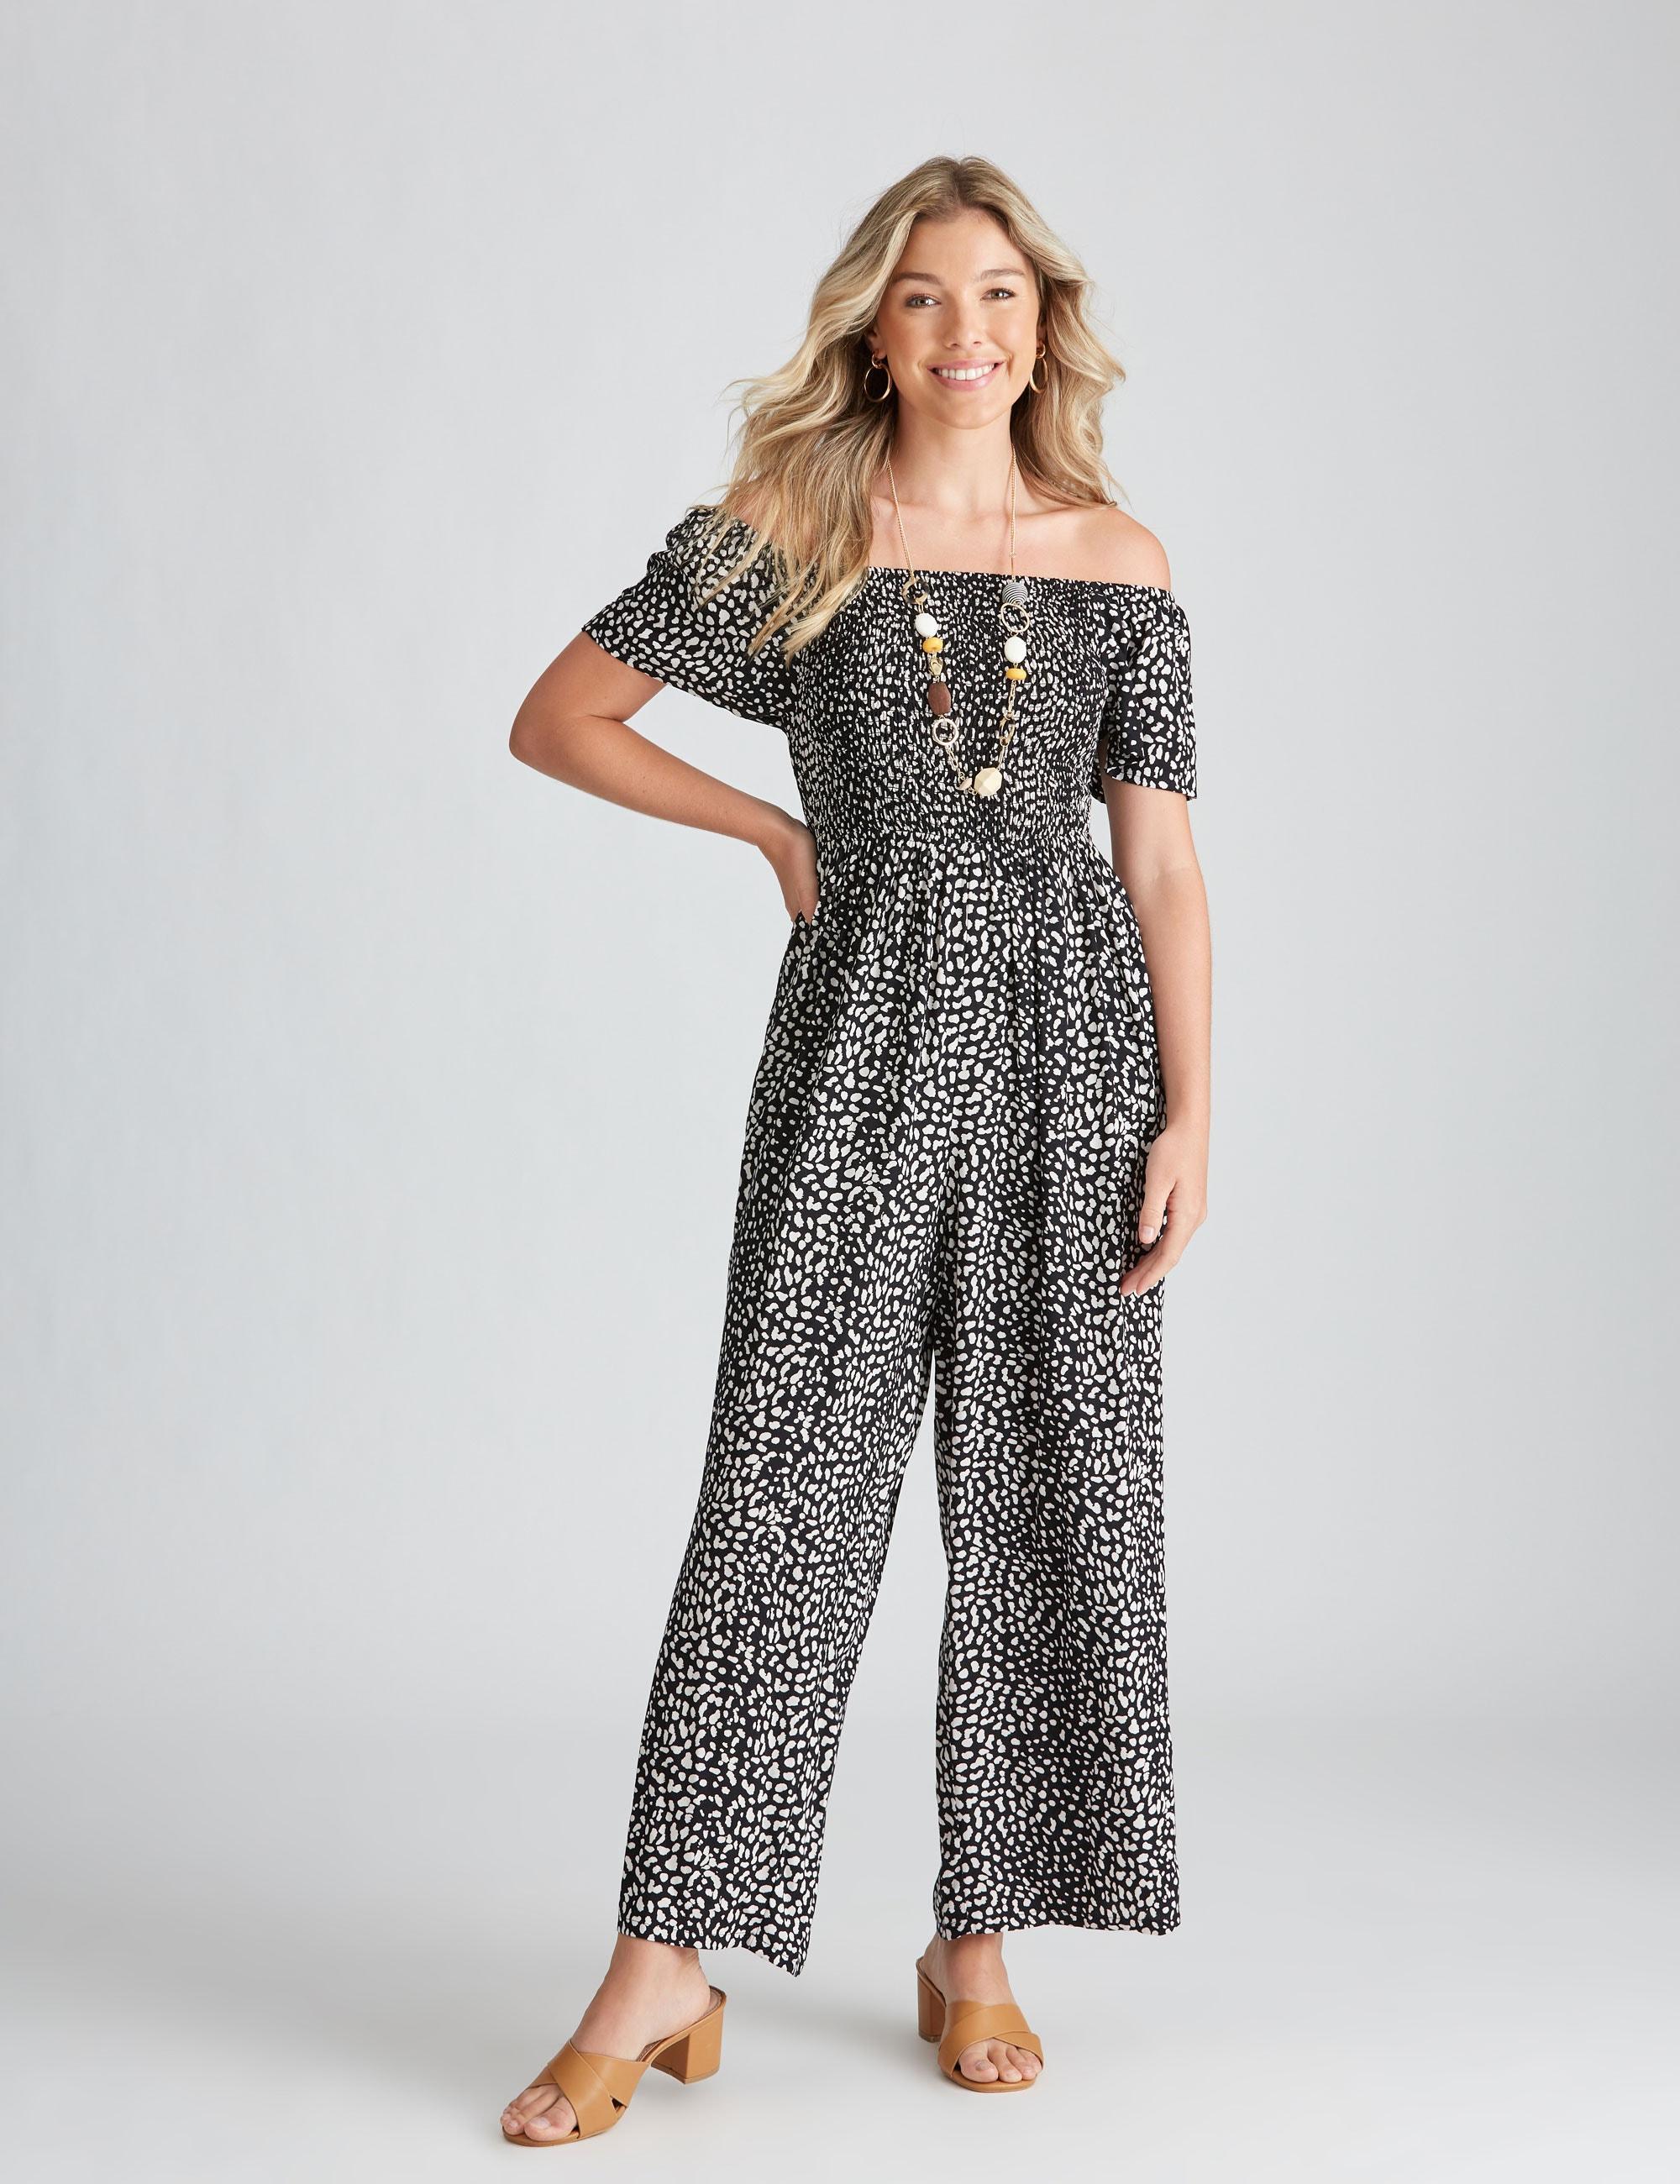 KATIES - Womens Jumpsuits - Woven Smocked Bodice Jumpsuit